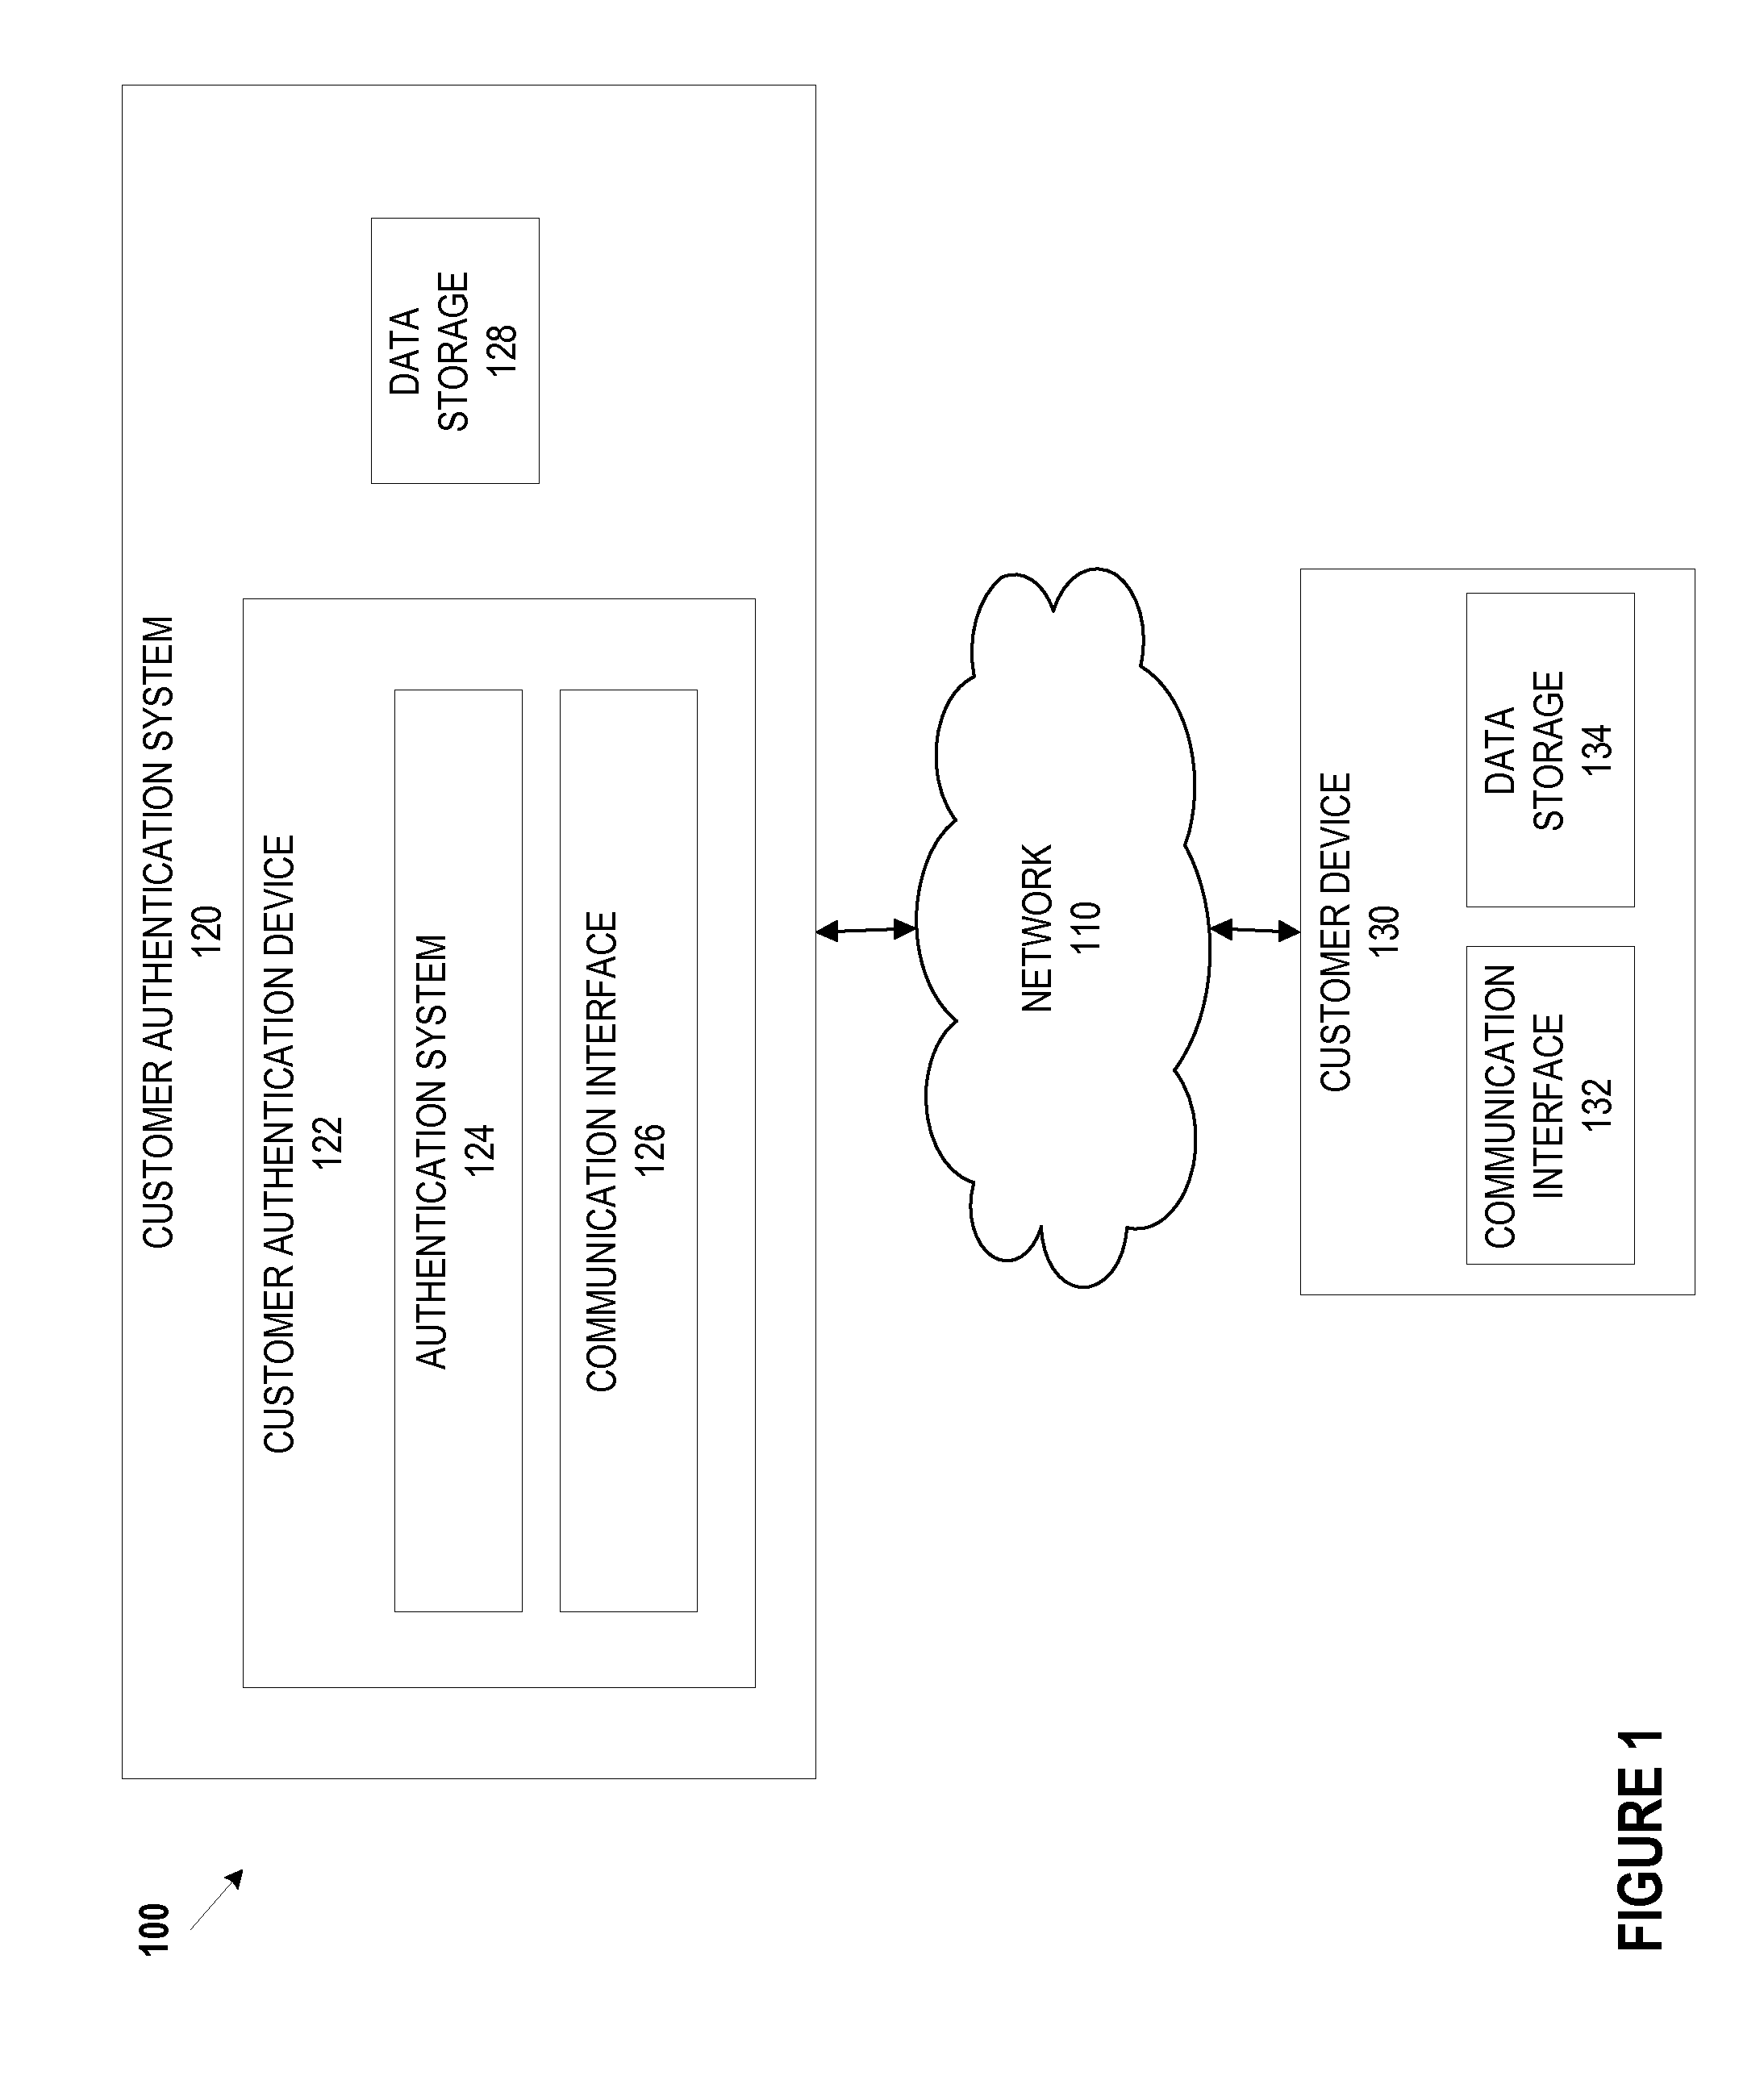 System and method for digital authentication